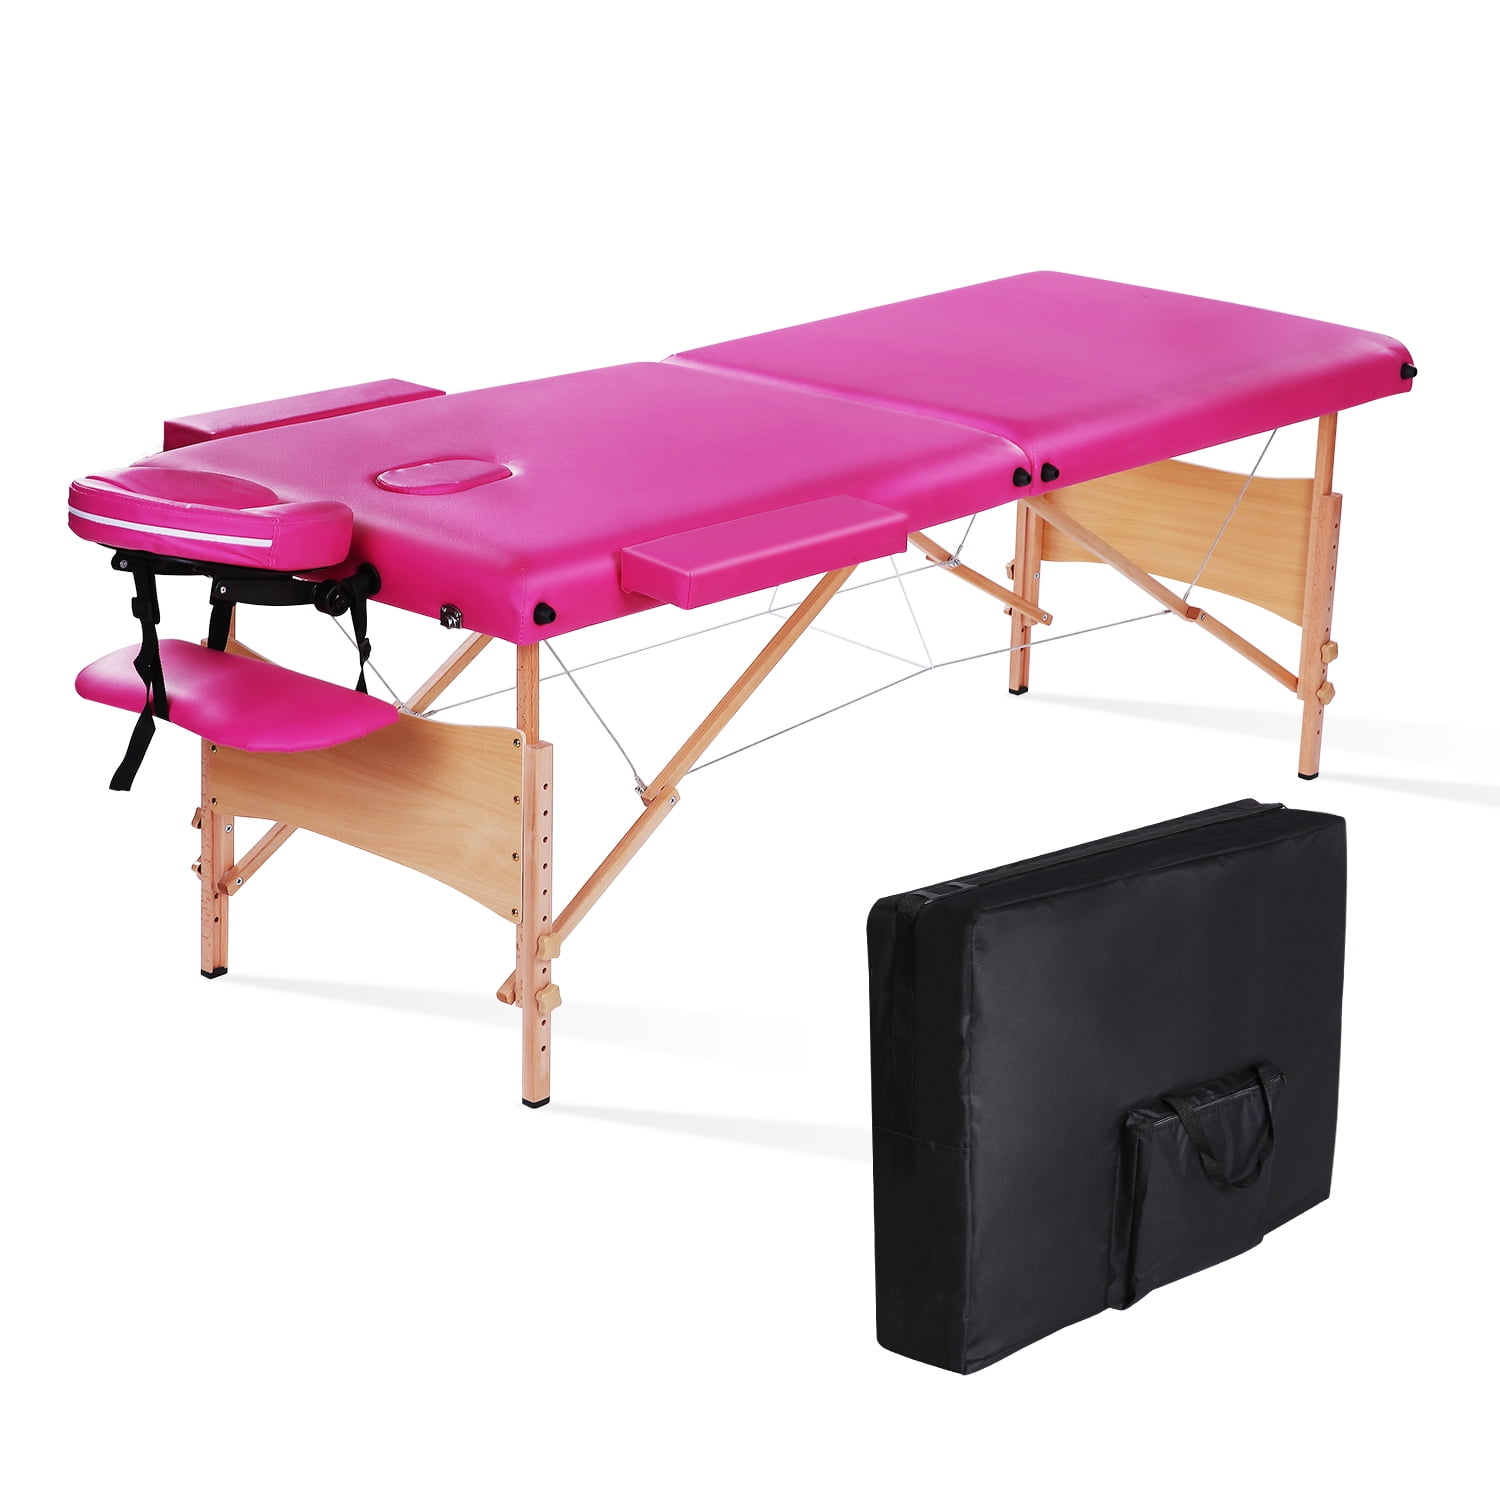 Buy Maxkare Portable Massage Table 84 Inch Massage Bed Spa Bed Lash Bed 2 Fold Facial Bed Wooden 